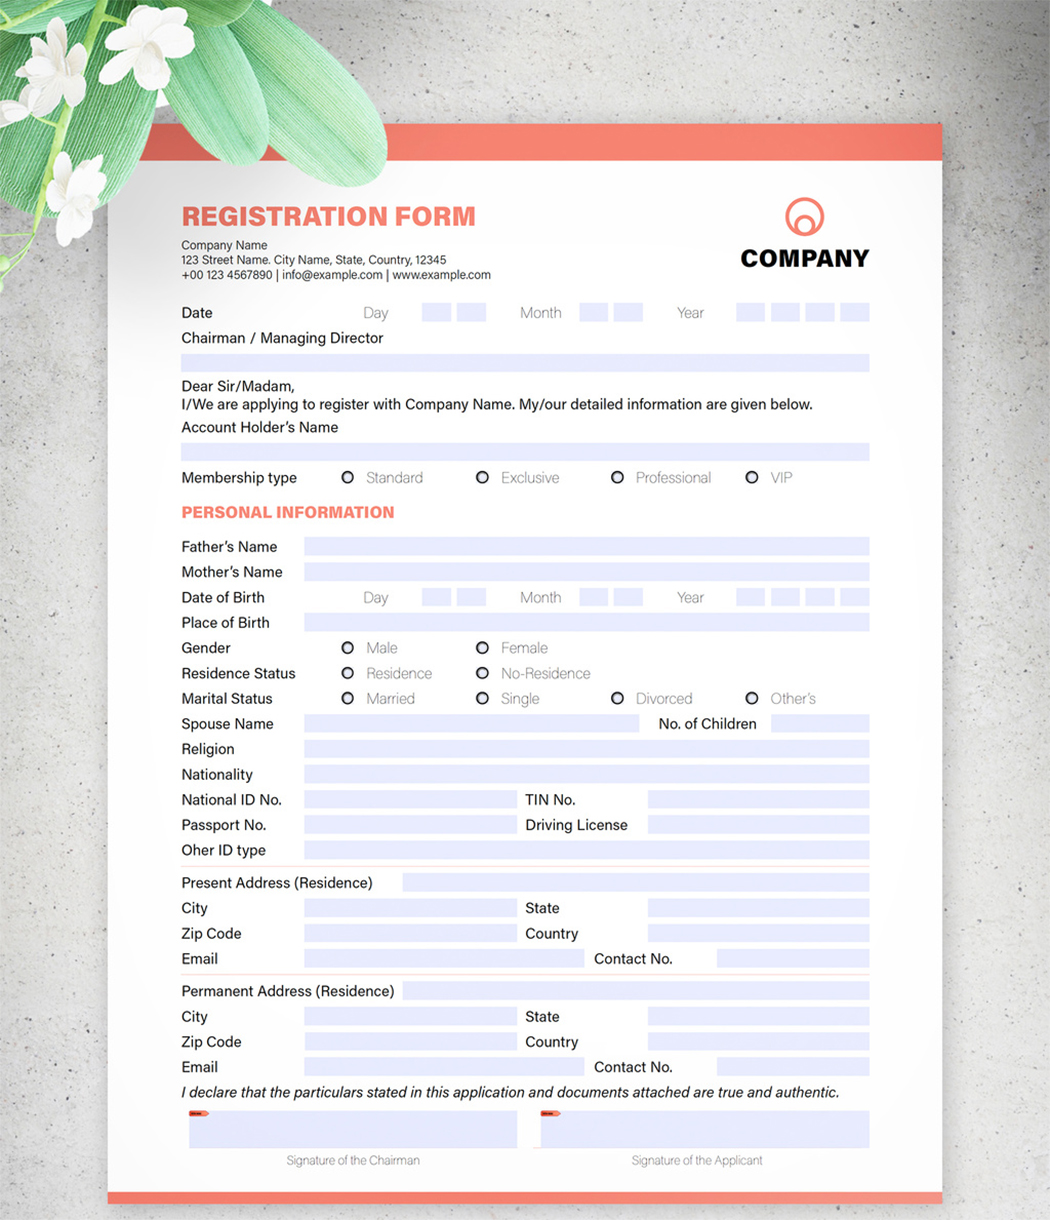 interactive-form-layout-with-red-header-and-footer-elements-indd